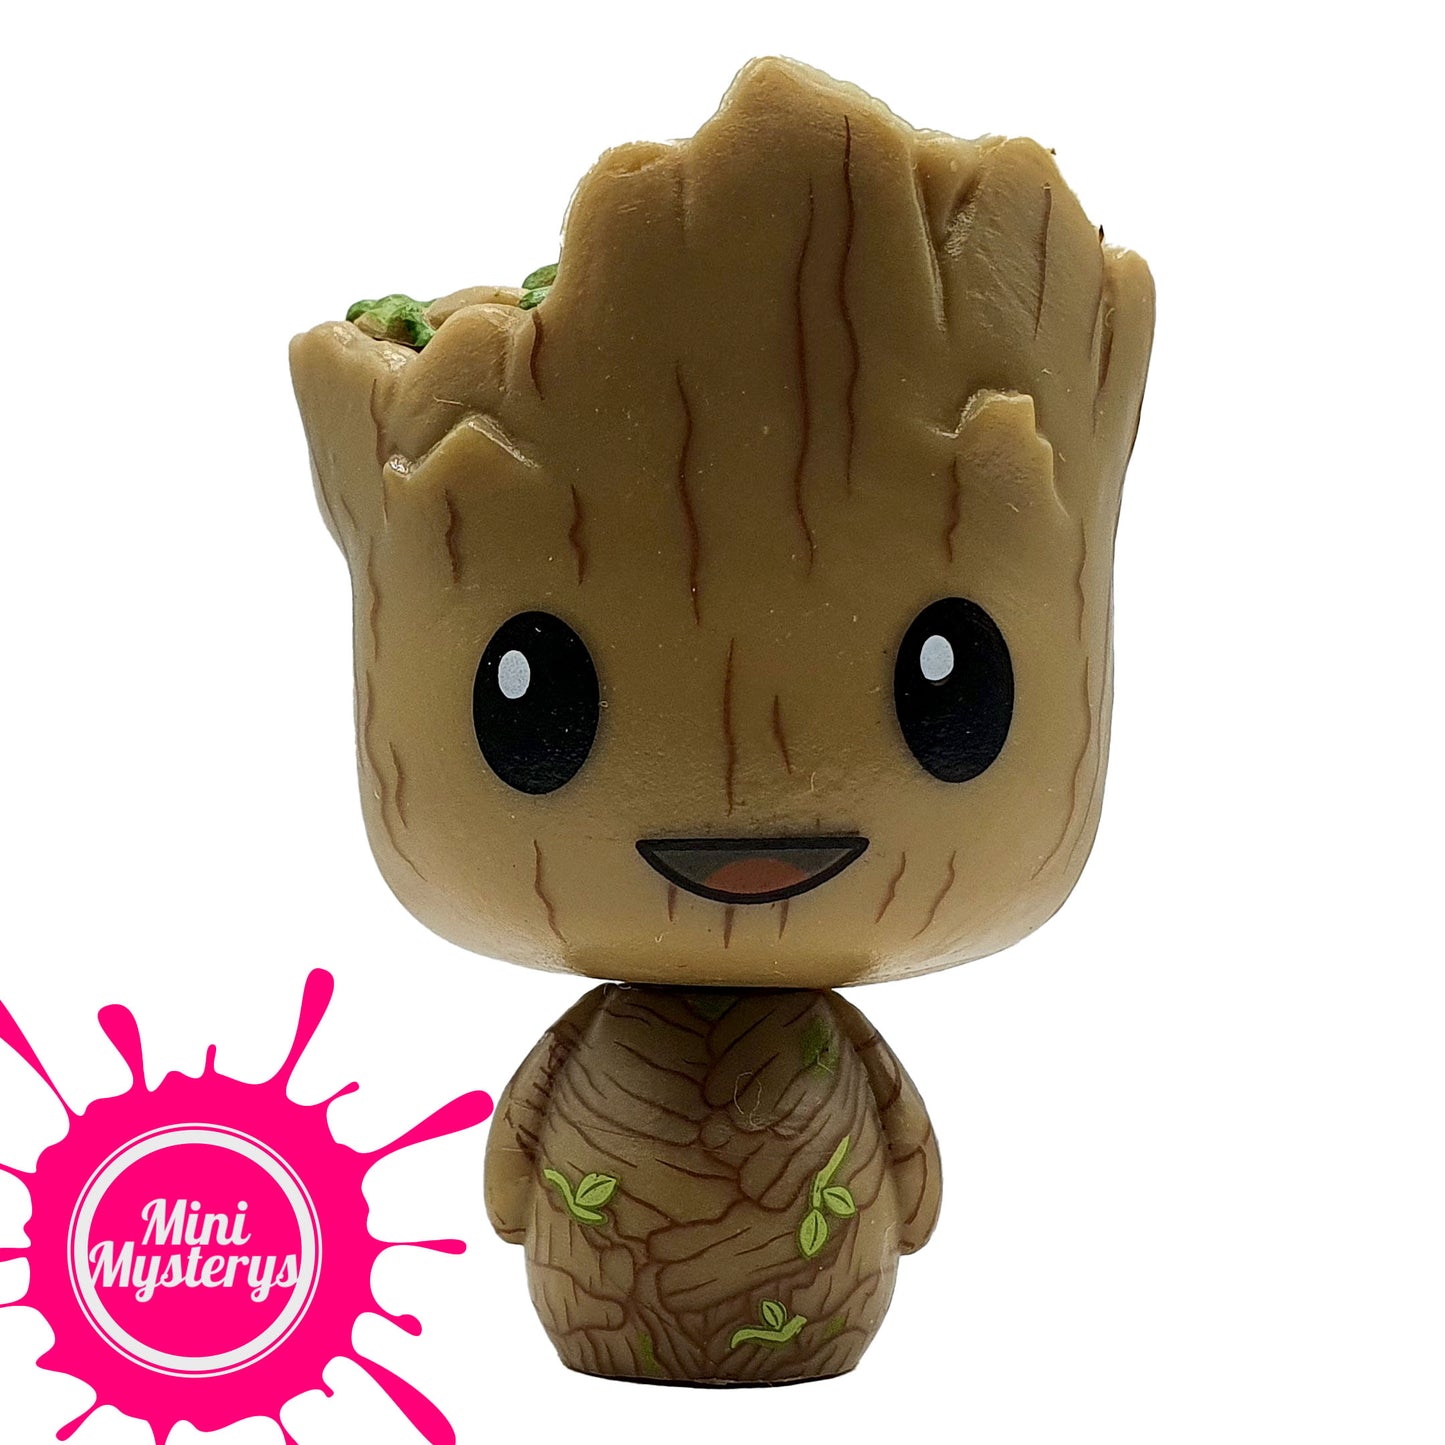 Guardians of the Galaxy Funko Pint Size Heroes - Choose Your Figure